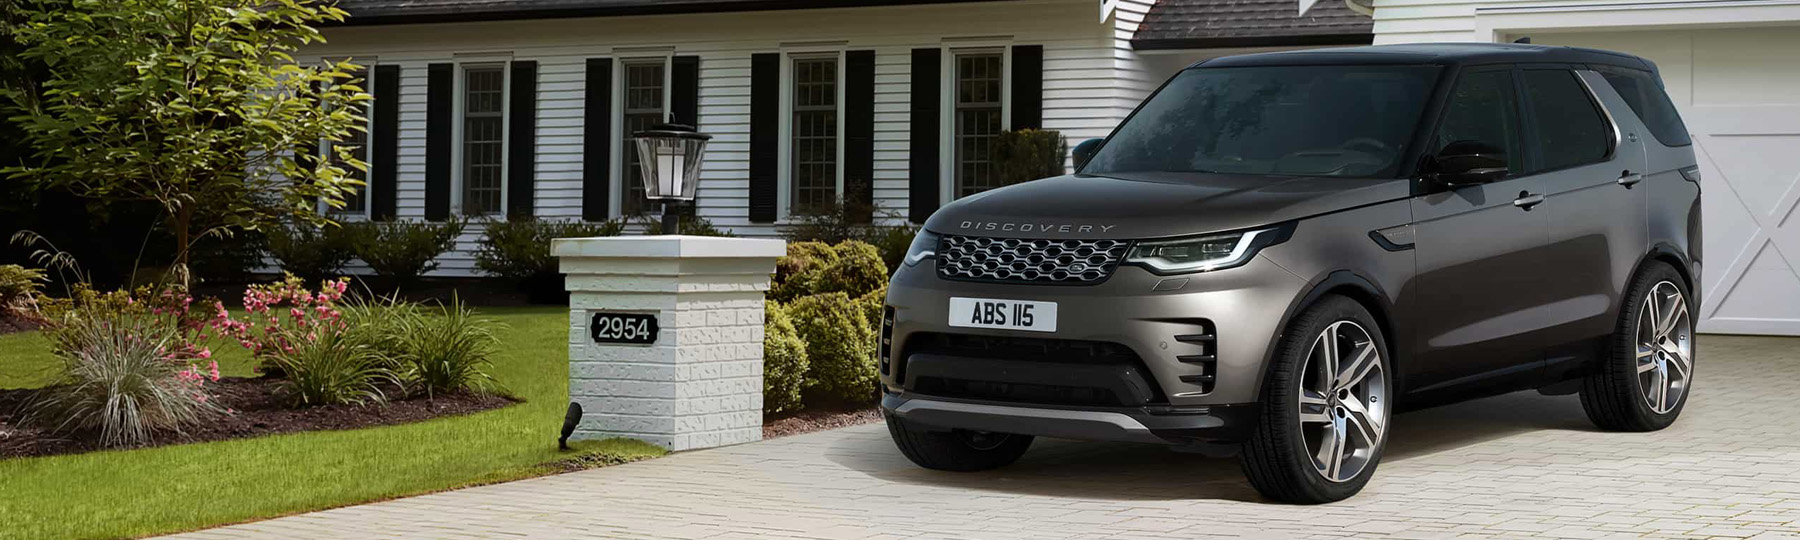 land rover Discovery Business Offer